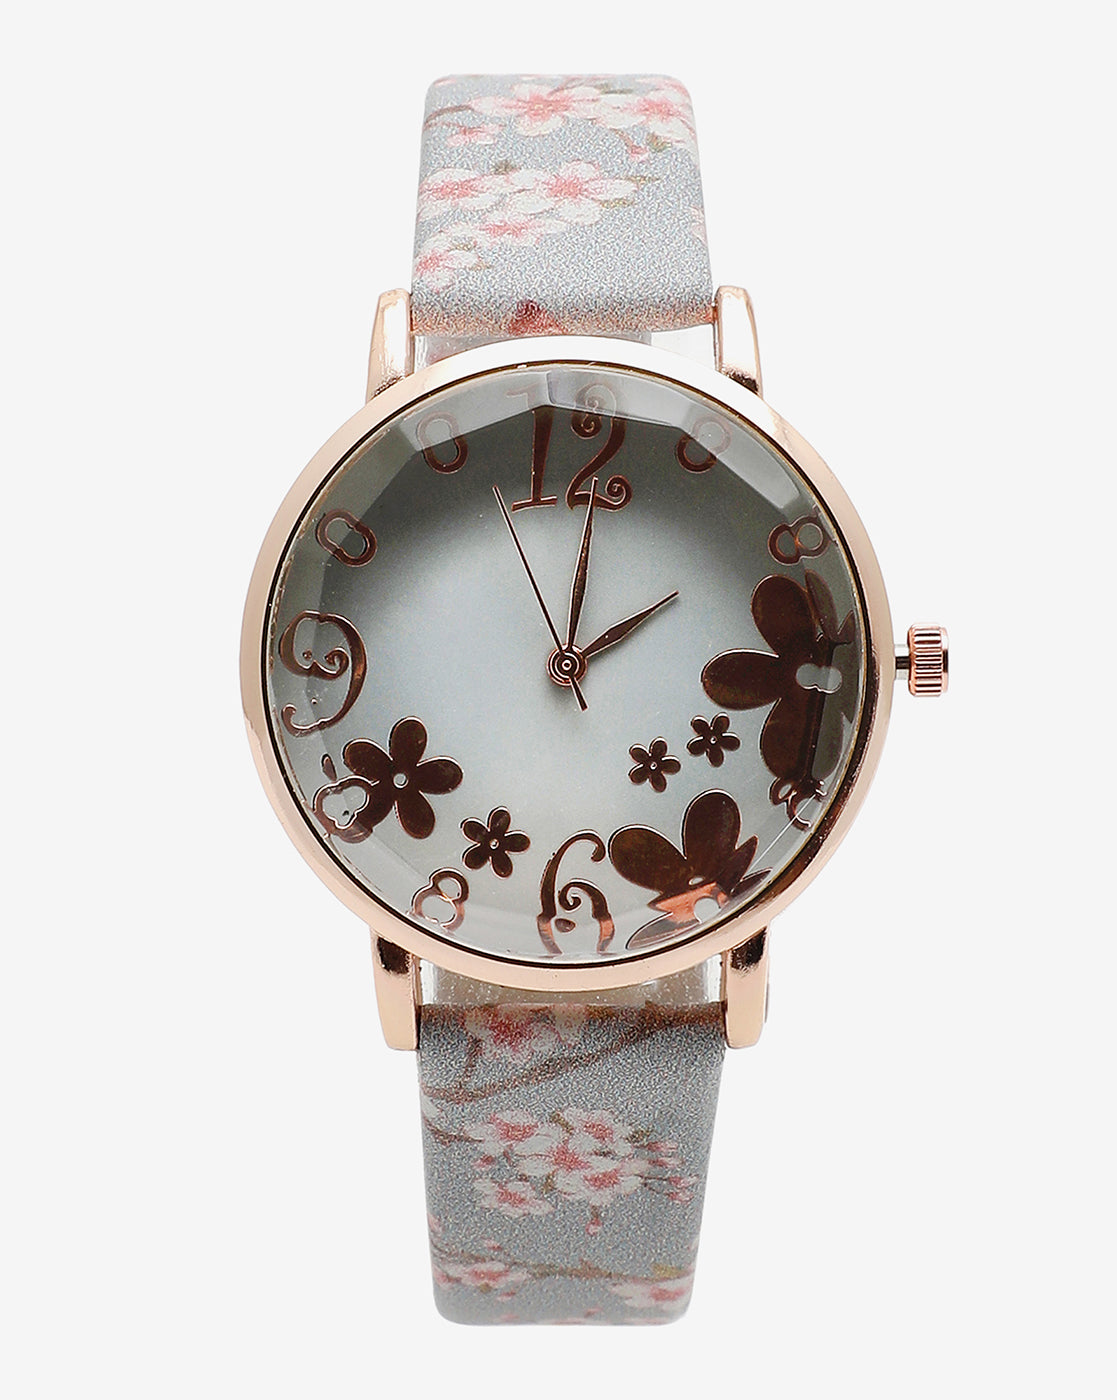 Grey & Champagne Gold Decorative Analog Round Dial With Floral Printed Leather Strap